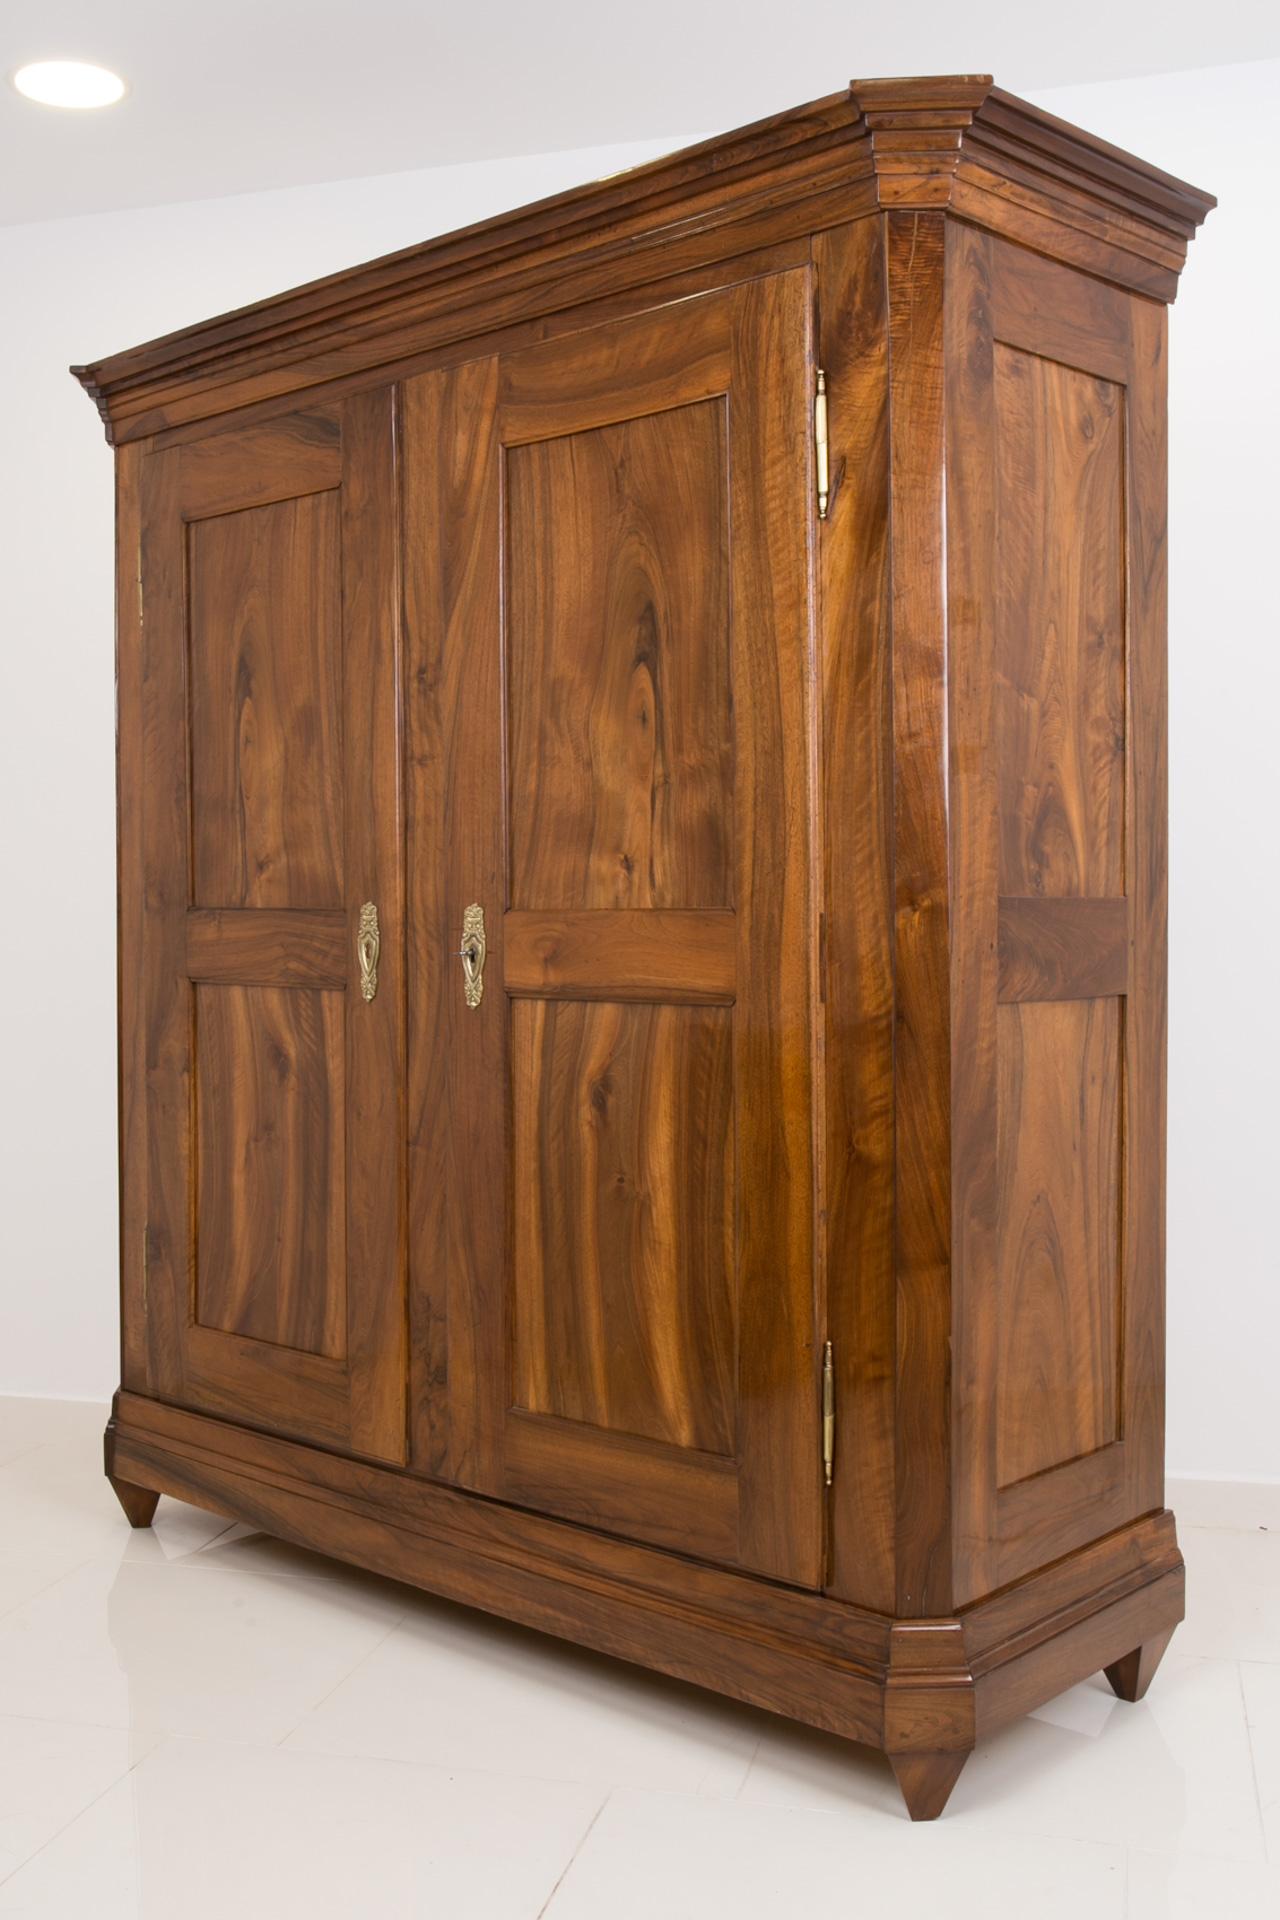 This magnificent wardrobe comes from Germany and was made around late 18th or early 19th Century. It is made of solid walnut wood. It has undergone a professional renovation process with highest care to every little detail to preserve the unique